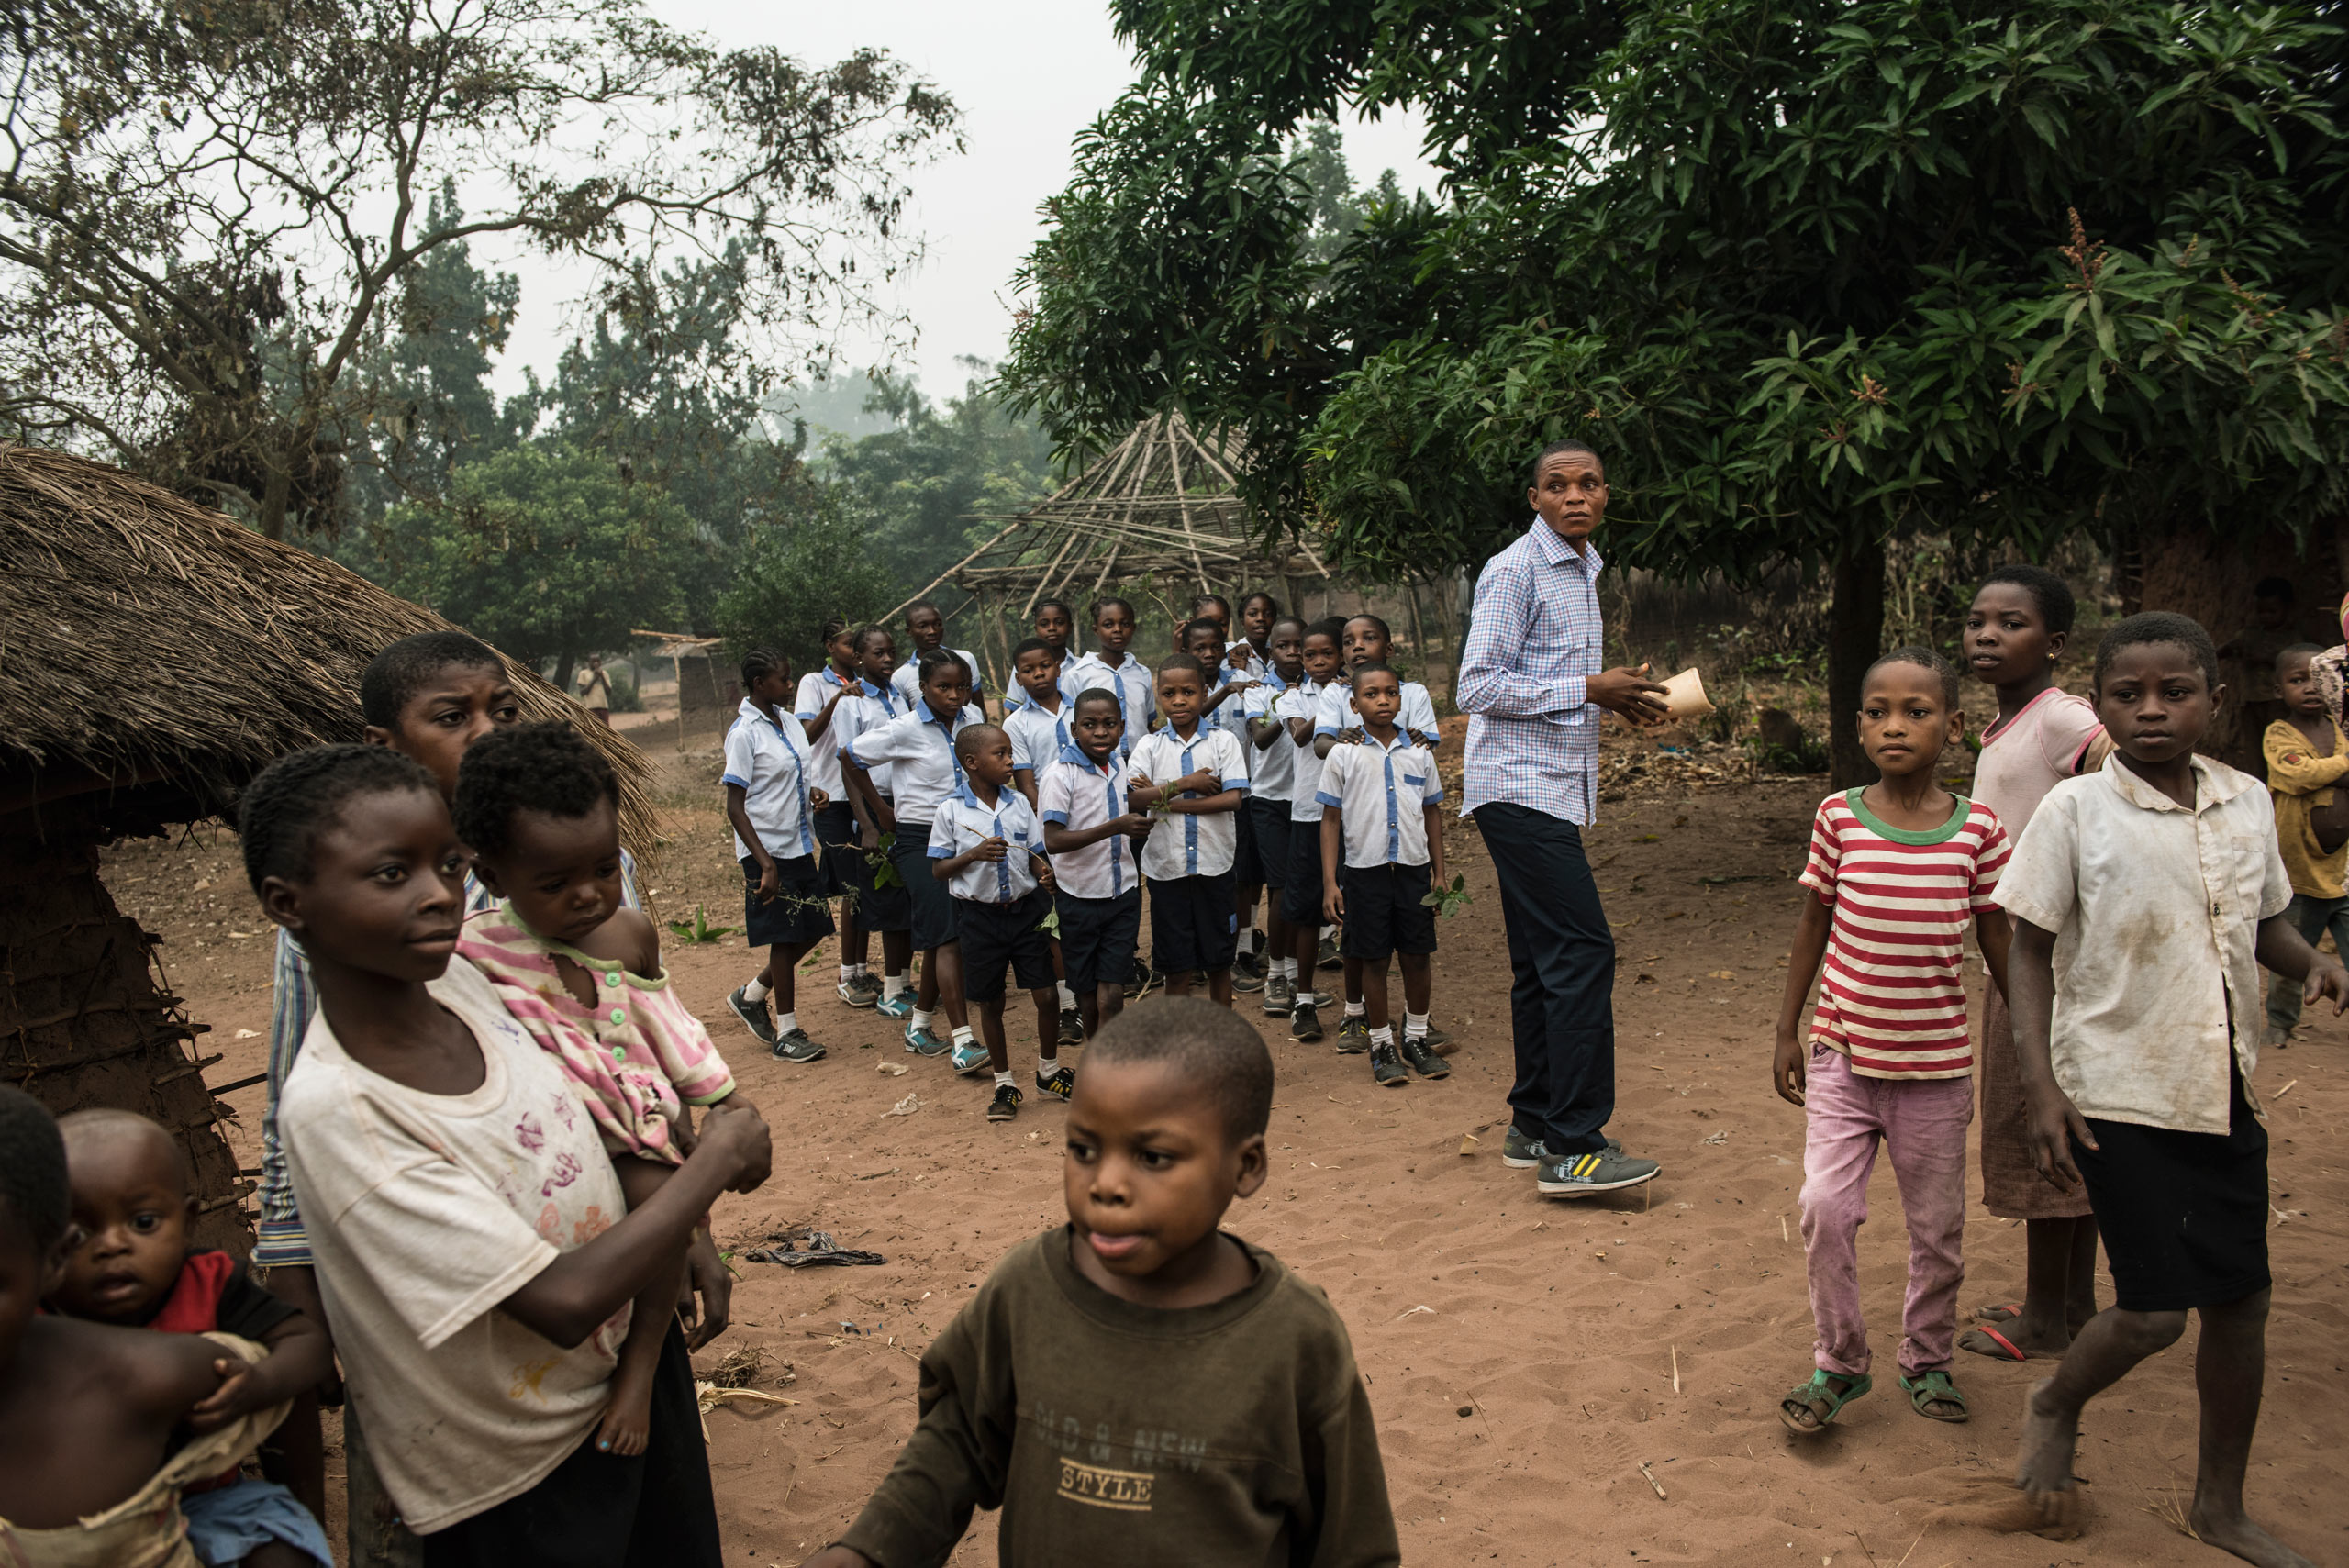 Congolese children attend the Brilliant Mobile School in the village of Lungudi,  Kasaï. The school's program uses funds from the diamond industry to educate miners' children. Aug. 7, 2015. (Lynsey Addario—Getty Images Reportage for TIME)